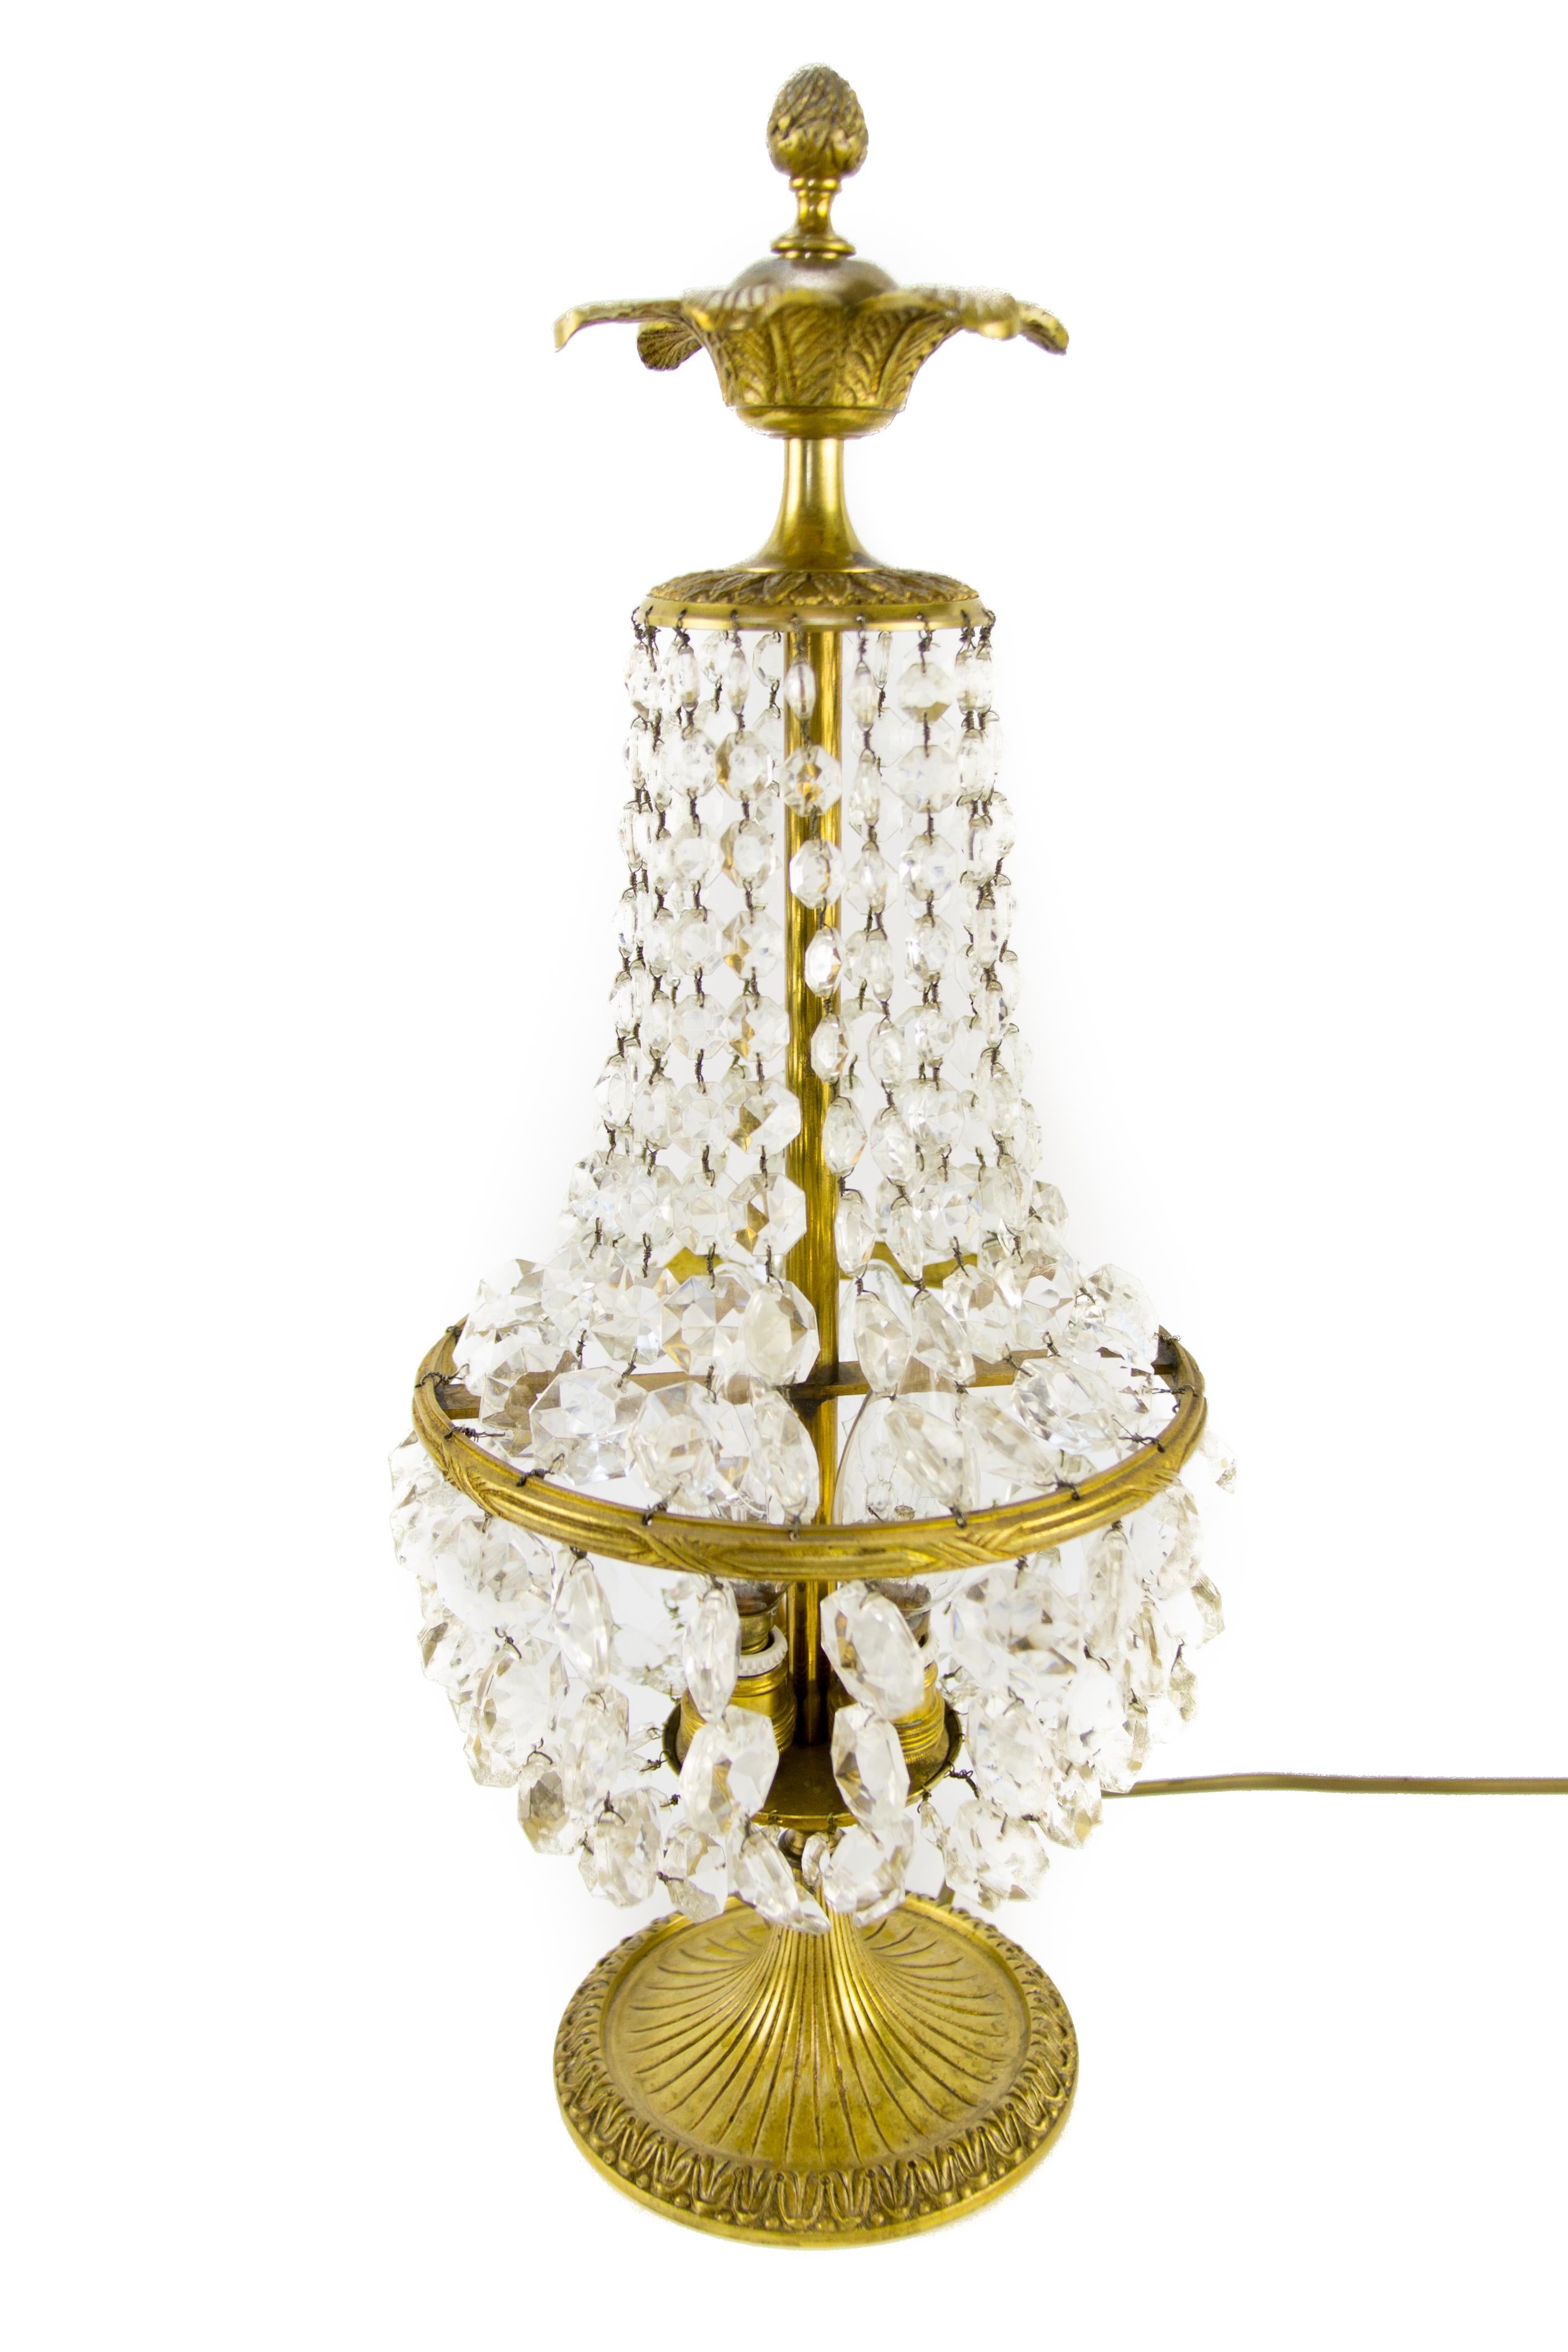 Beautiful Empire style crystal glass and bronze basket table lamp. Three interior lights with E14 size light bulb sockets. France, 1950’s.
Height: 50 cm / 19.6 in; width: 20 cm / 7.8 in.